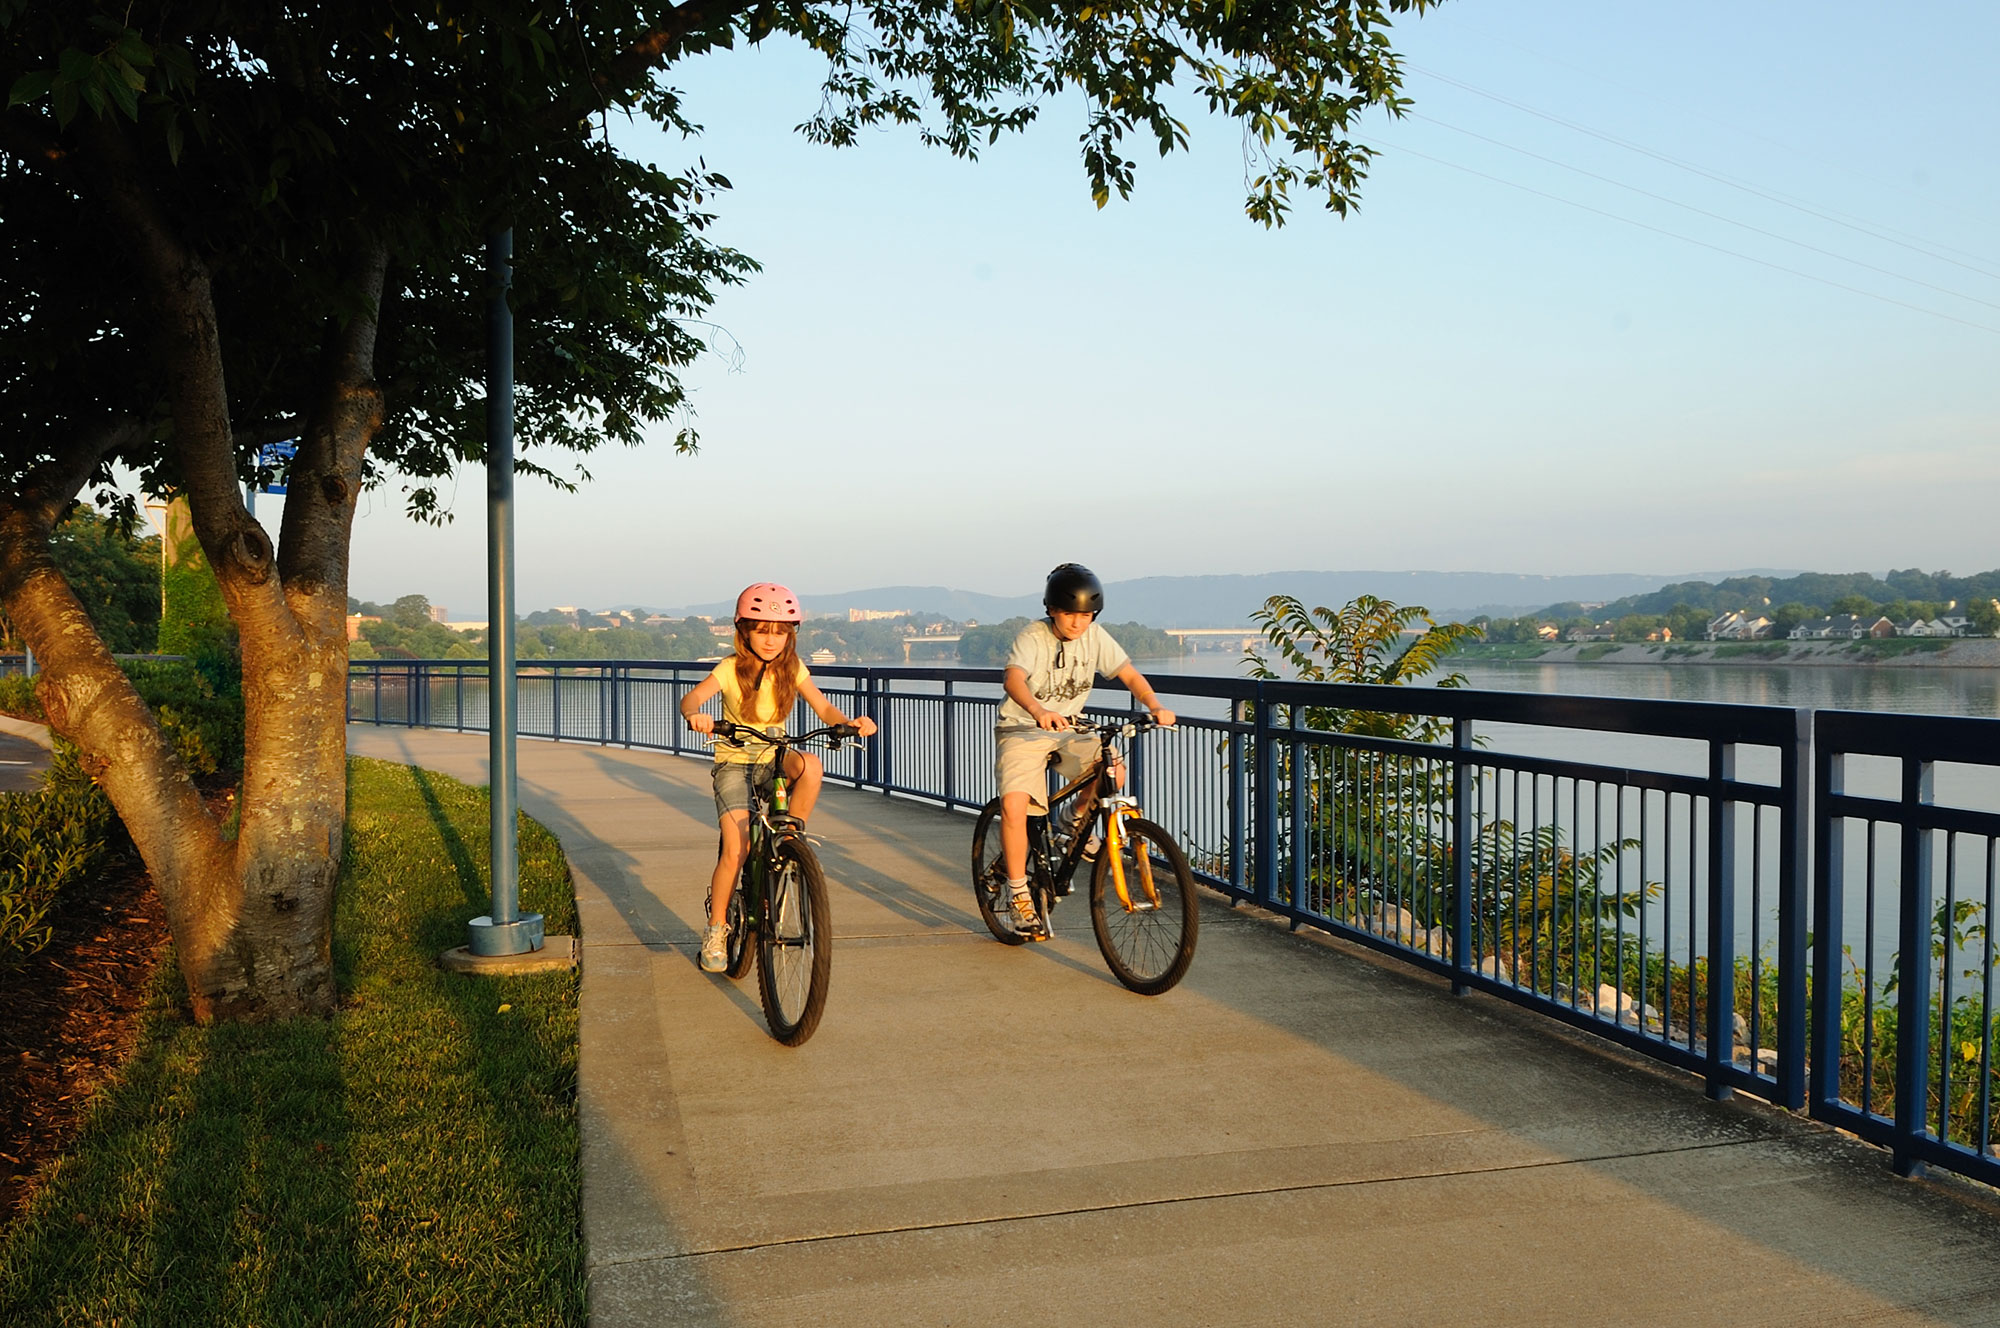 Two people riding bikes on a sidewalk next to a body of water.